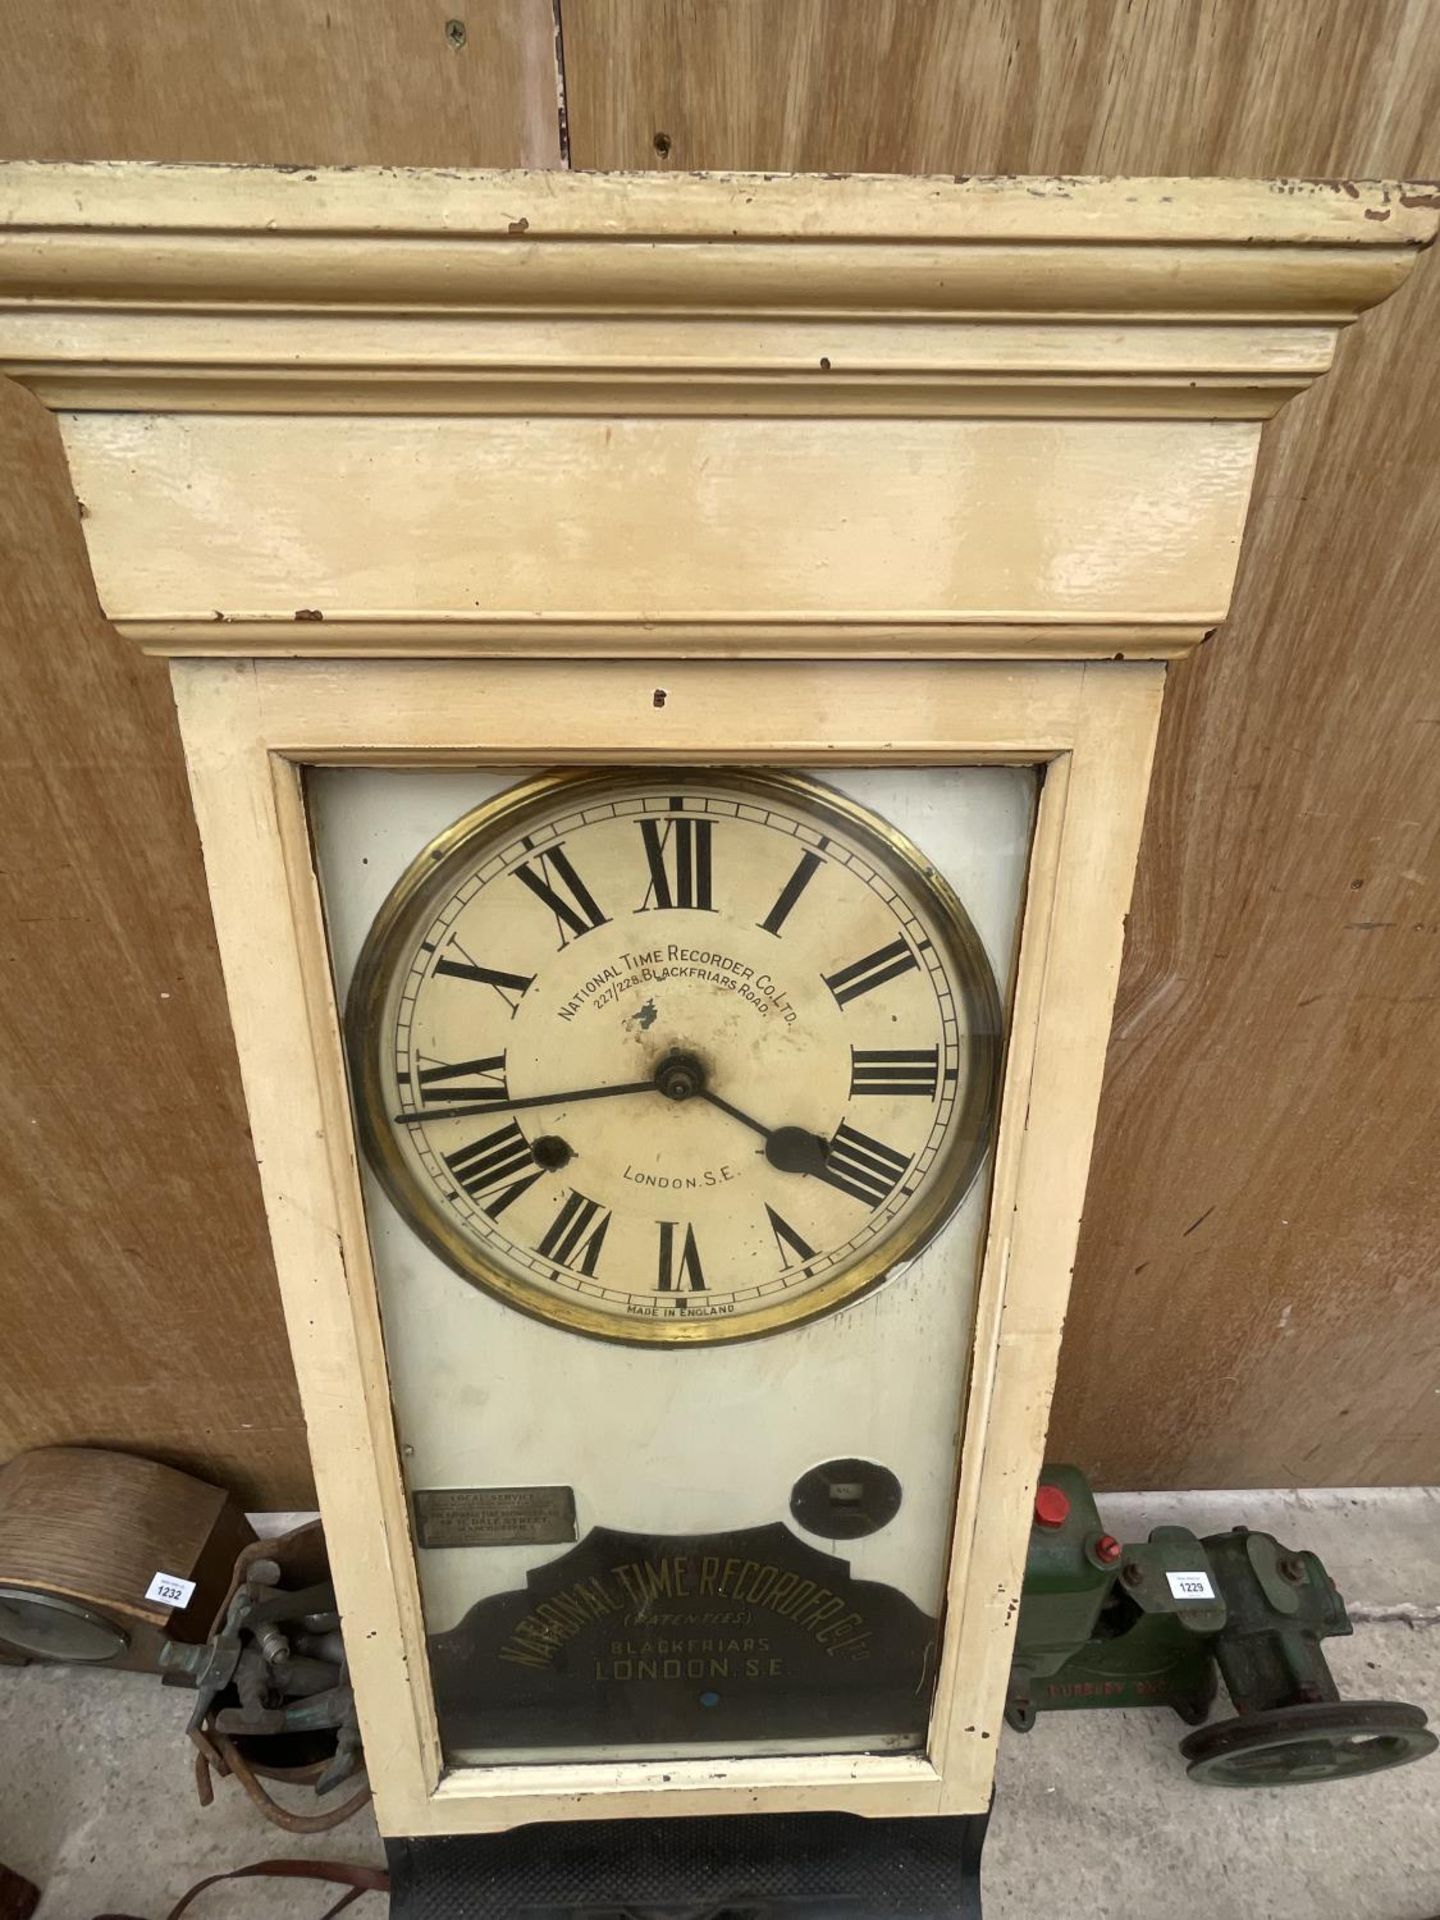 A NATIONAL TIME RECORDER CO LTD 227/228 BLACKFRIARS ROAD LONDON SE CLOCKING IN/OUT CLOCK - Image 2 of 10